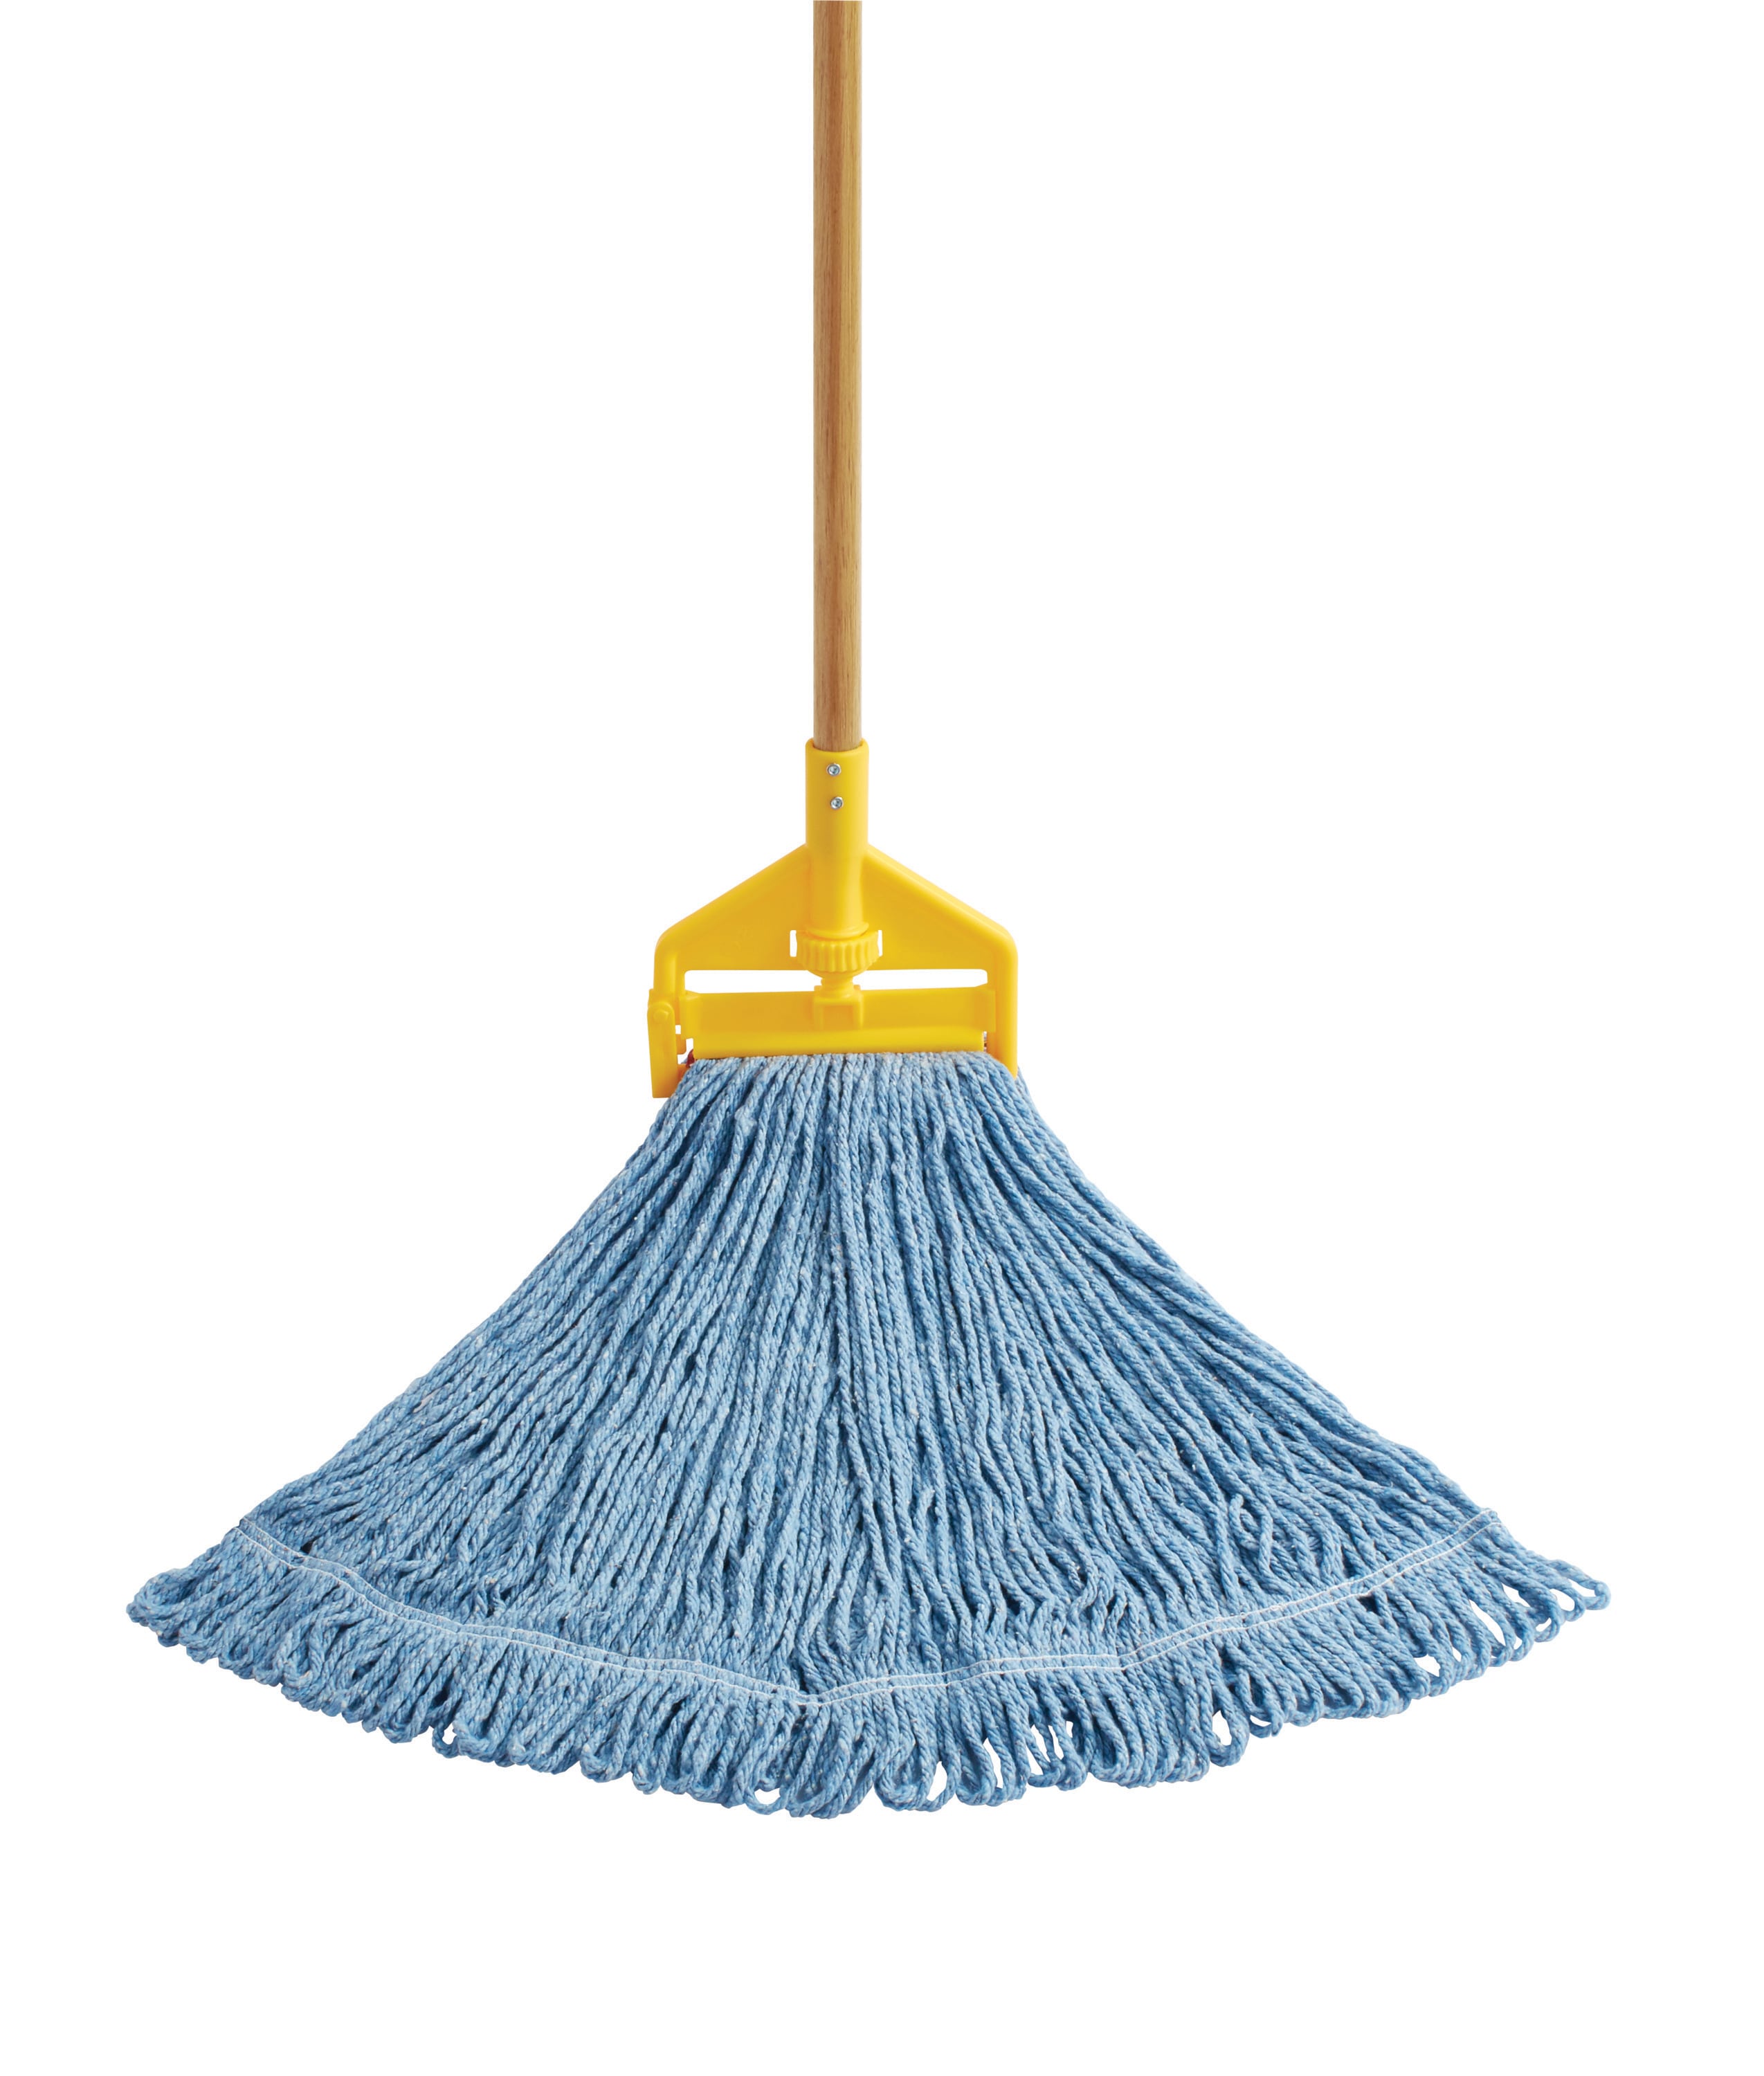 Rubbermaid Commercial Products Blend Non-Wringing String Mop | FGU71528BL00